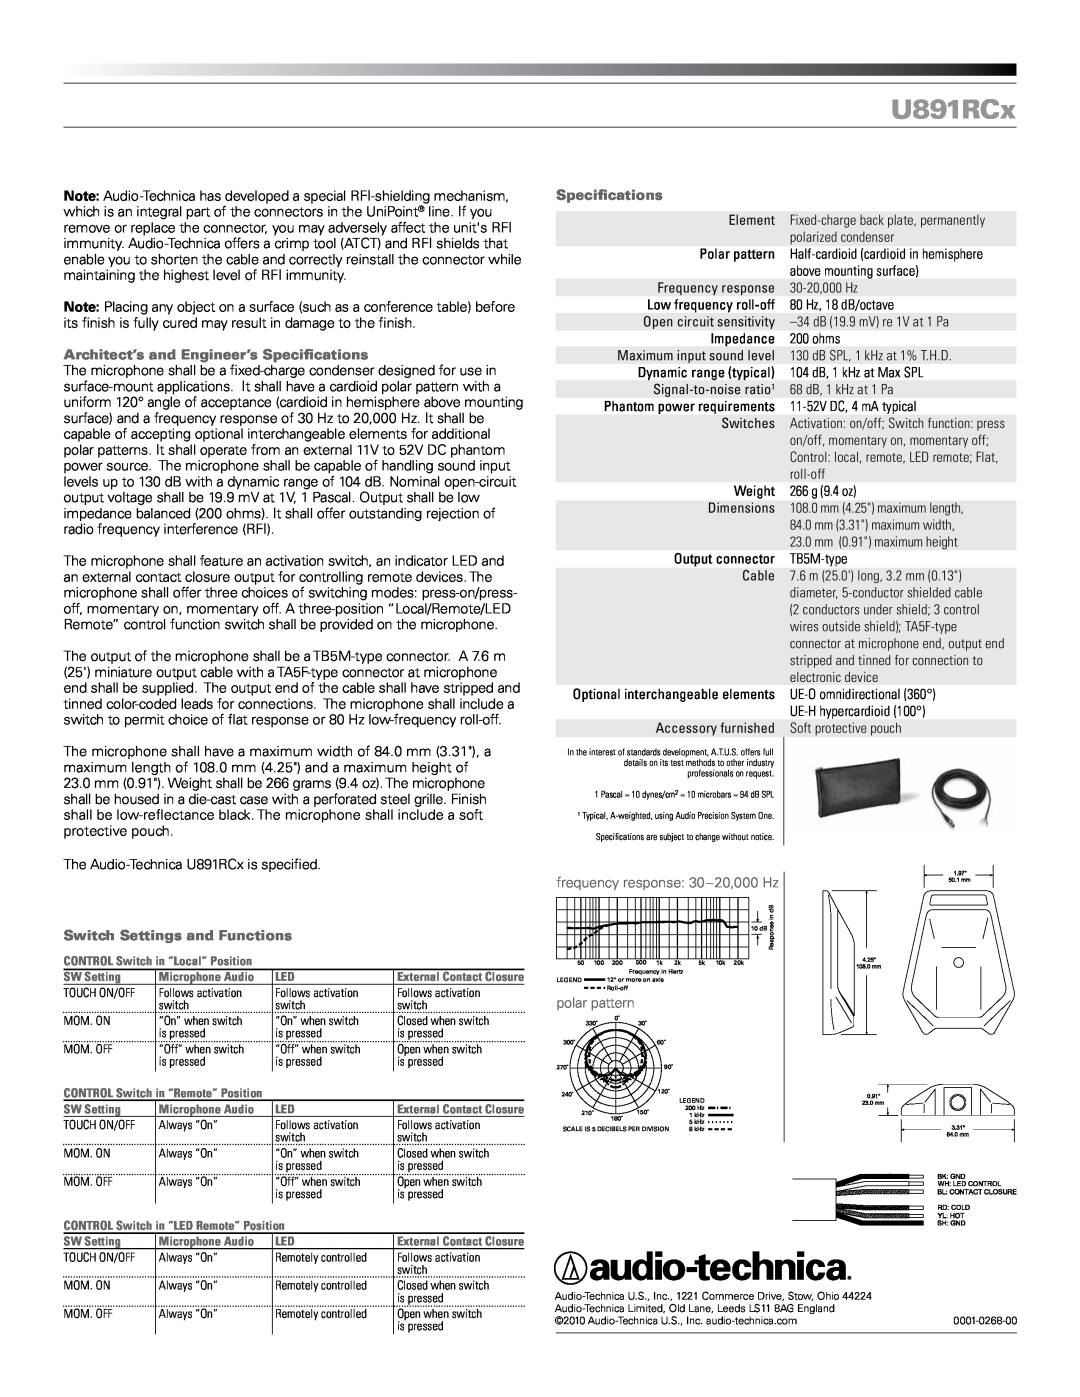 Audio-Technica U891RCX Architect’s and Engineer’s Specifications, Switch Settings and Functions, U891RCx, polar pattern 